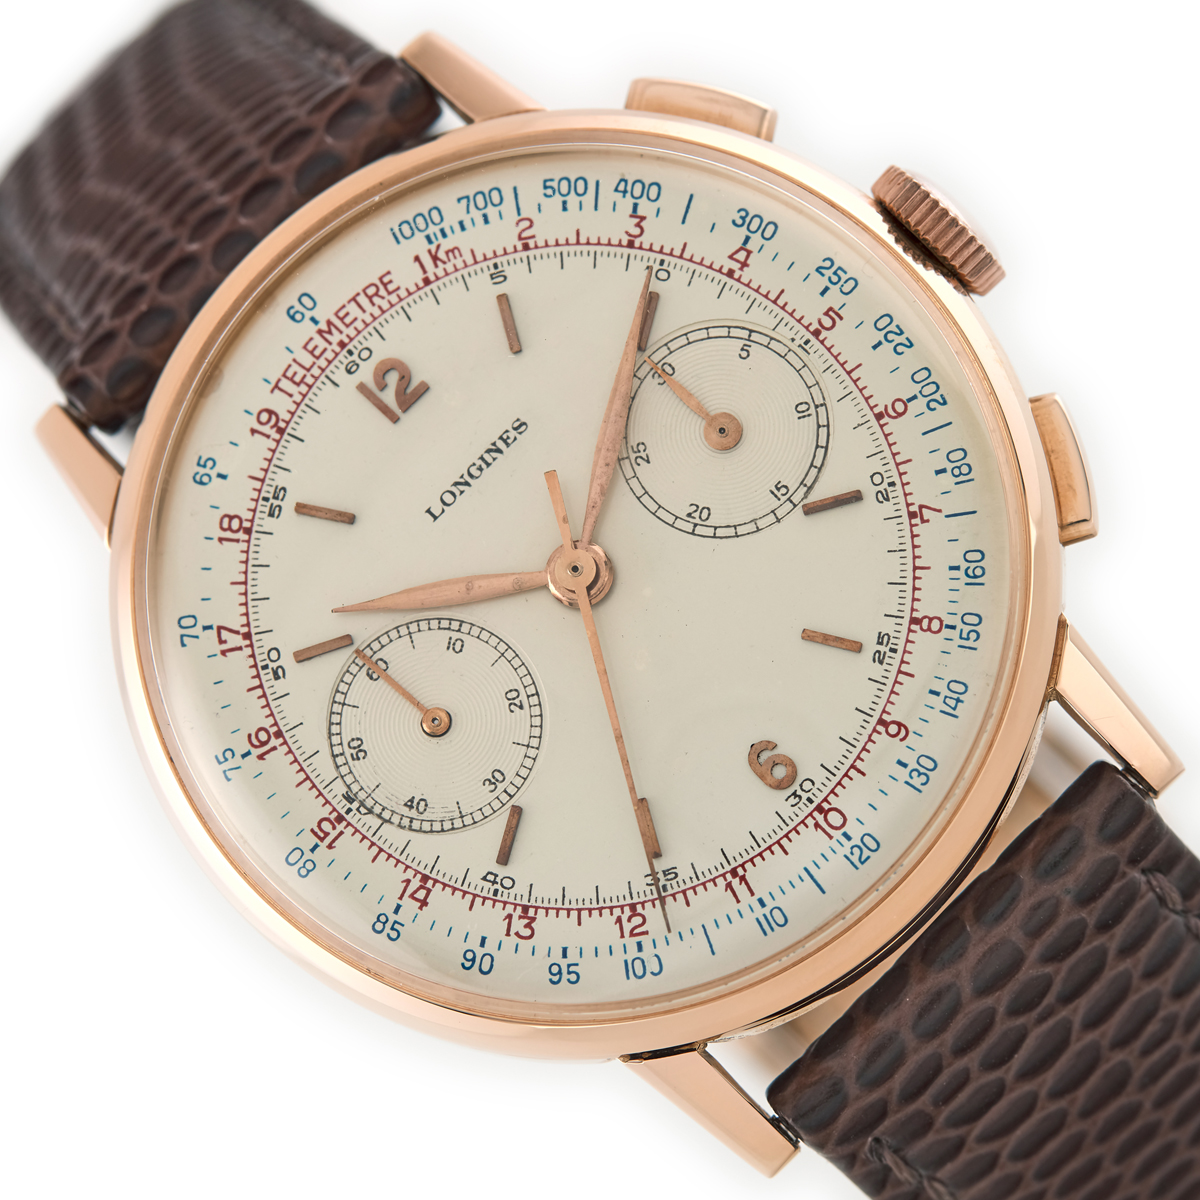 Longines Chronograph18ct Pink Gold vintage watch